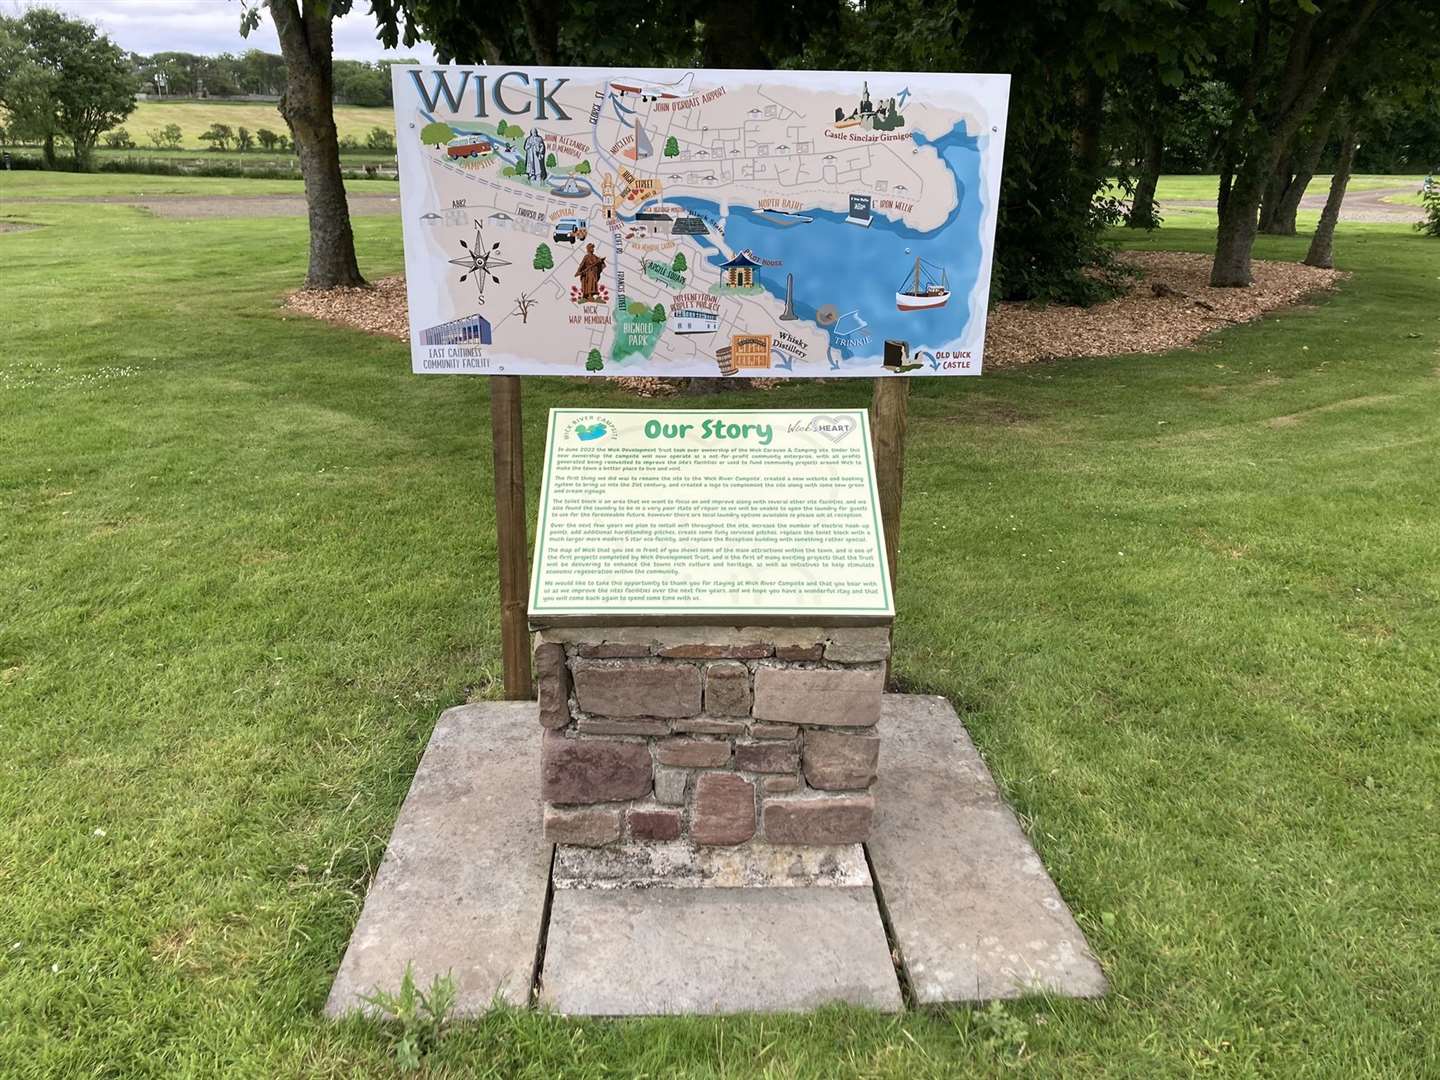 A newly installed Wick information board in the caravan site.